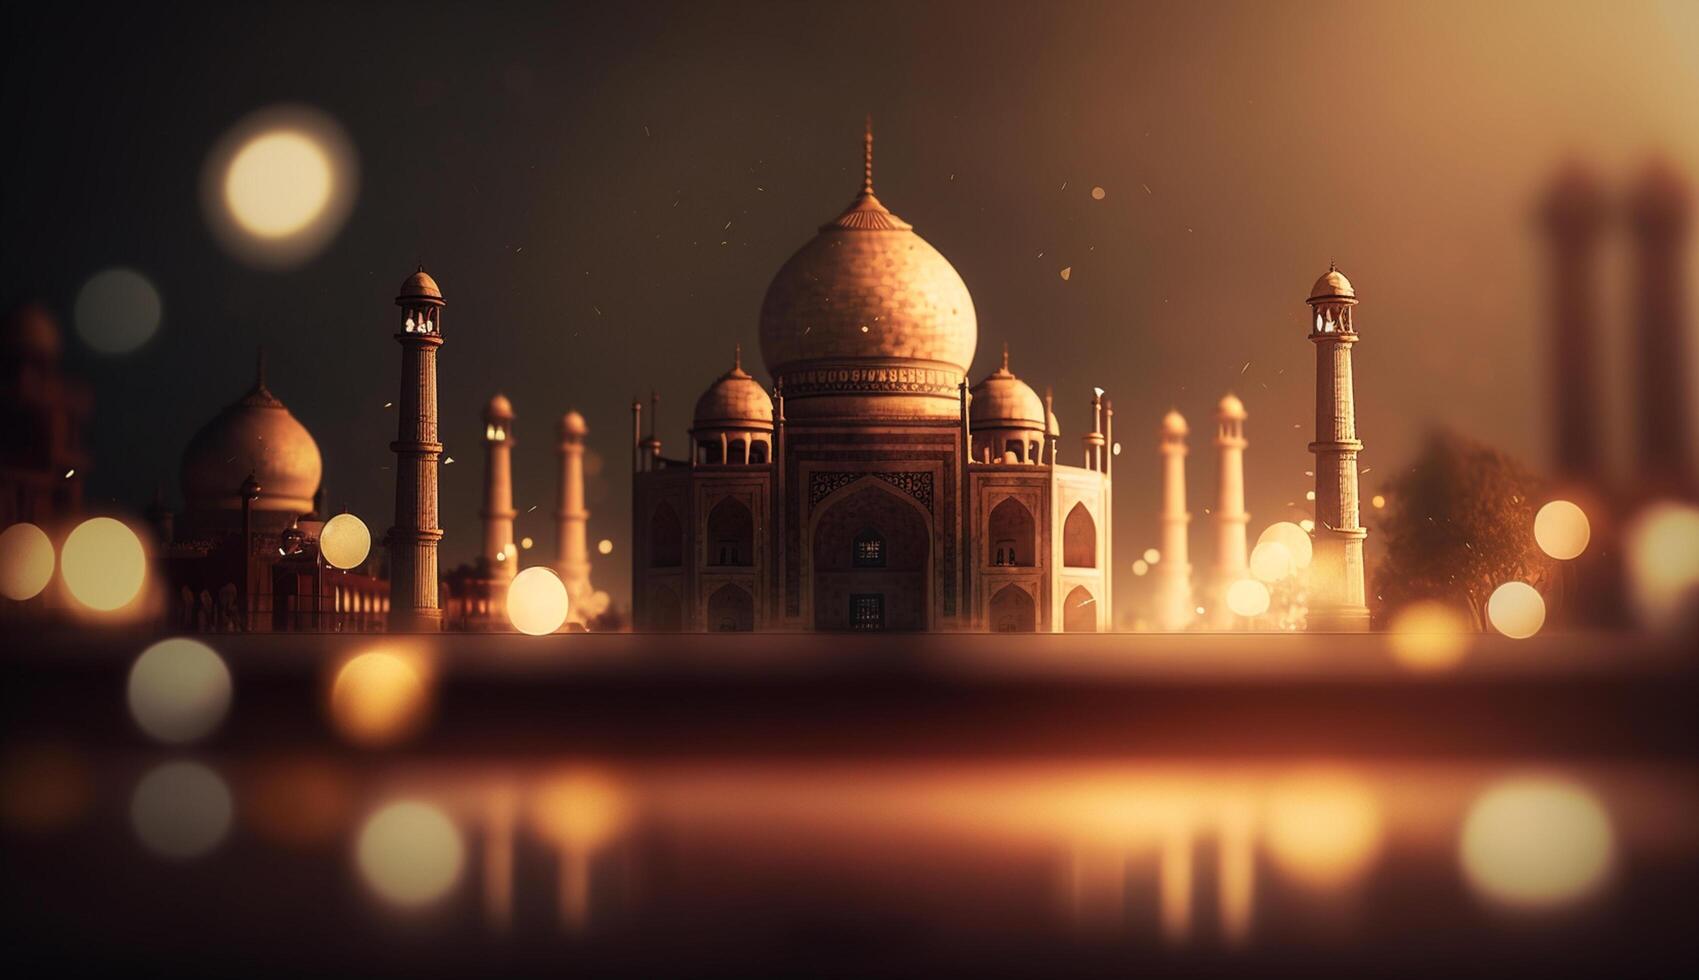 Taj Mahal Mystical and Magical Photographic Composition of India's Iconic Monument photo